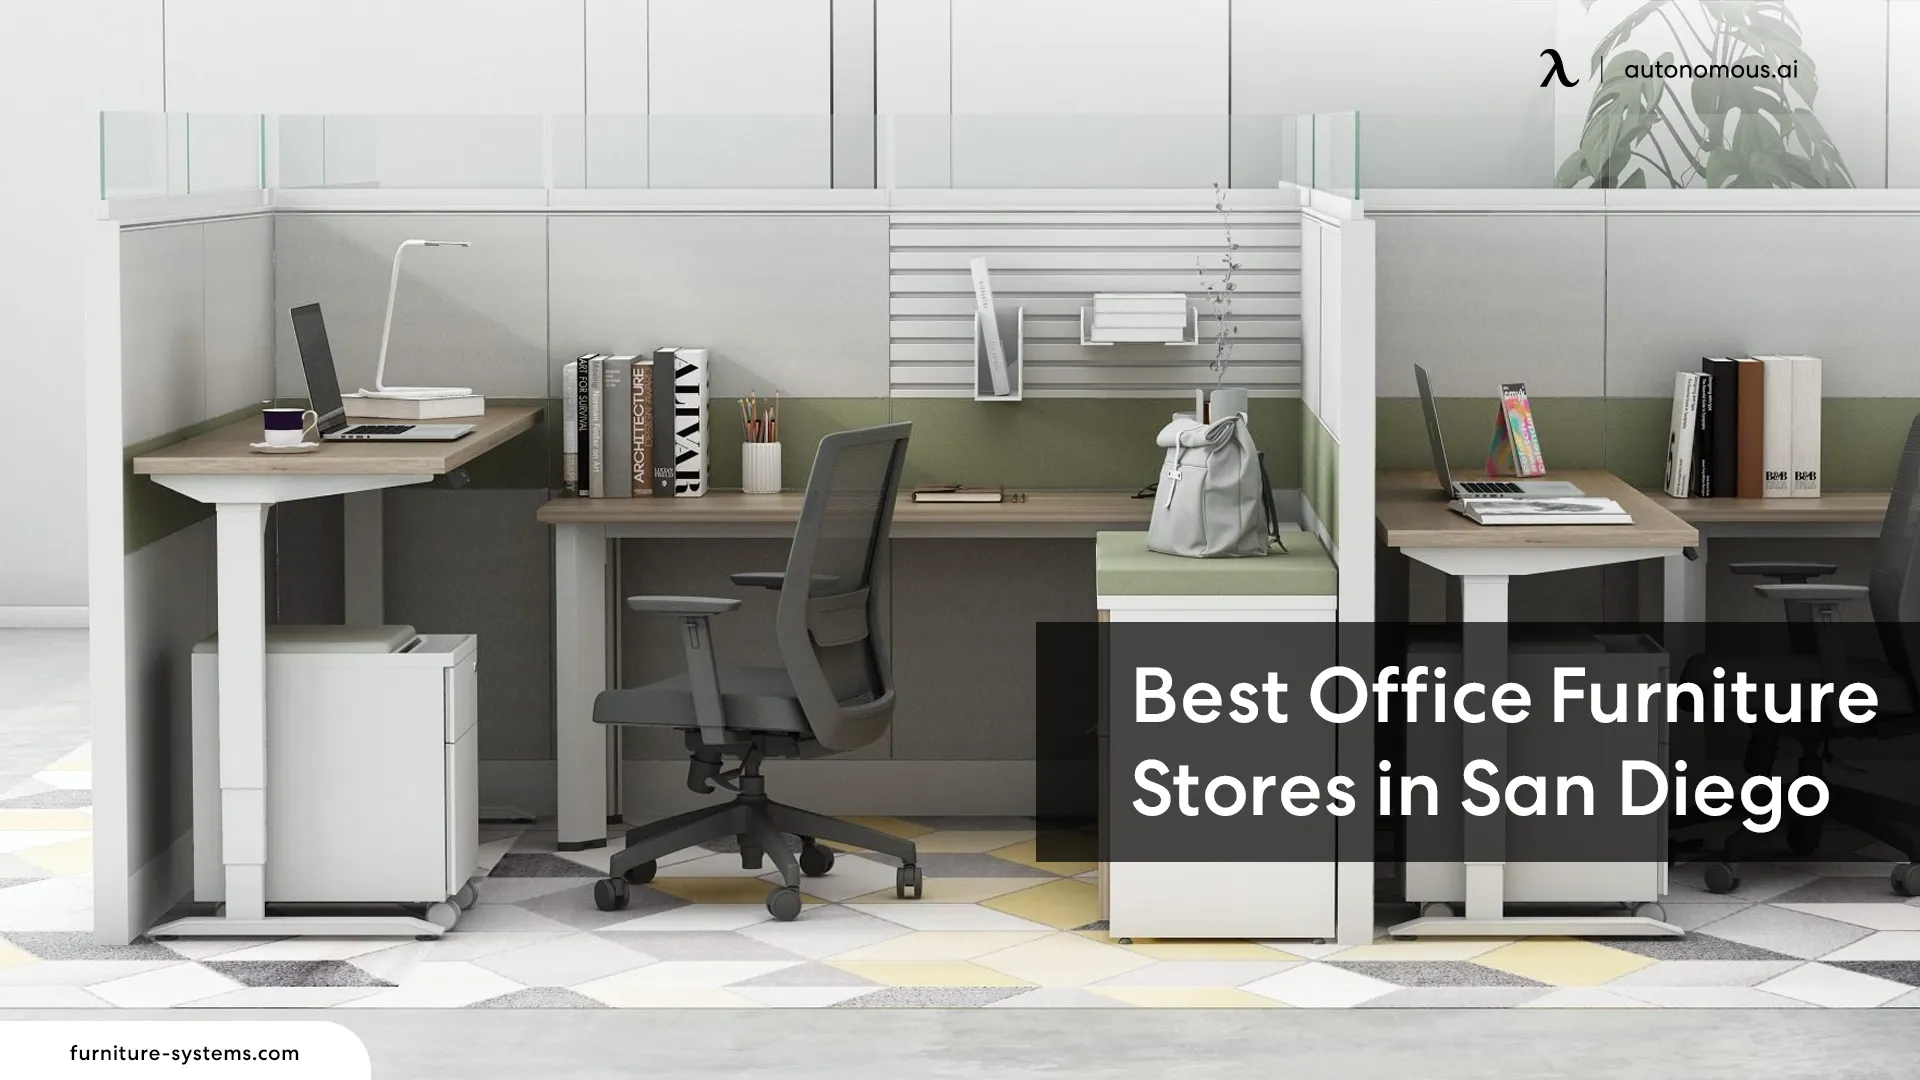 Top 10 Stores to Buy Office Furniture in San Diego